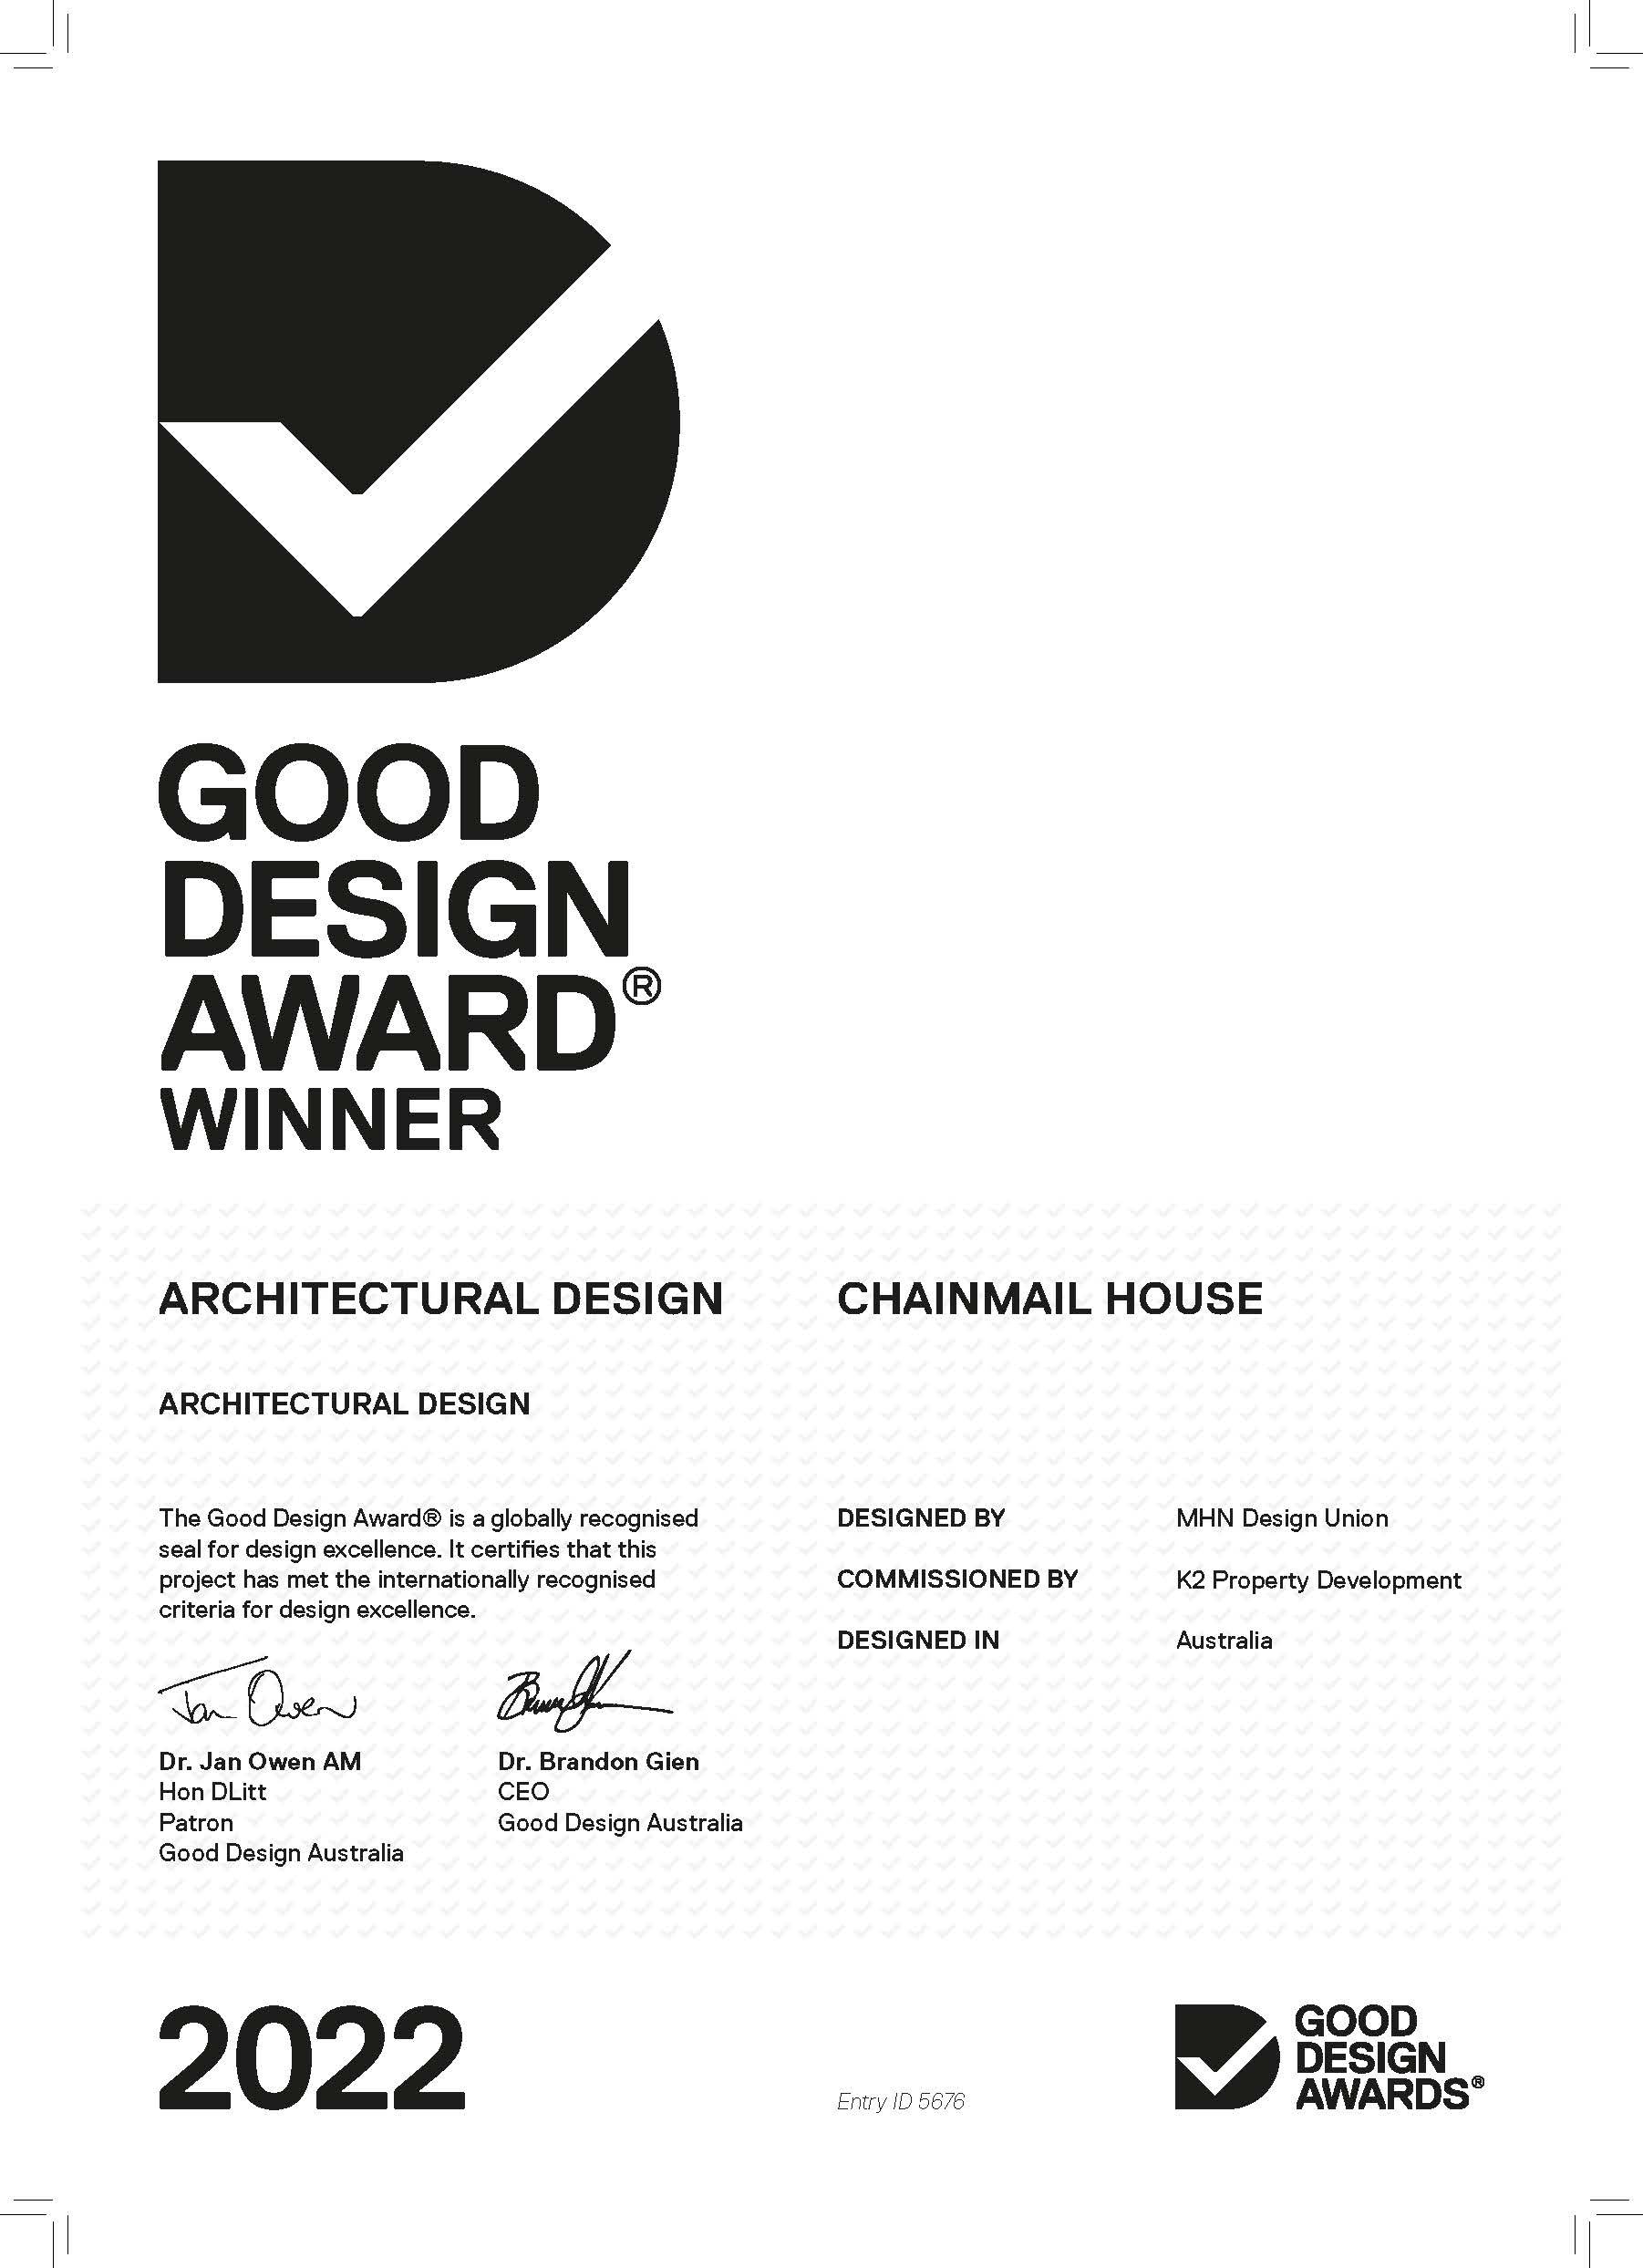 17-031 - 88 New South Head Rd_Chainmail House_Good Design Award Certificate_22.jpg